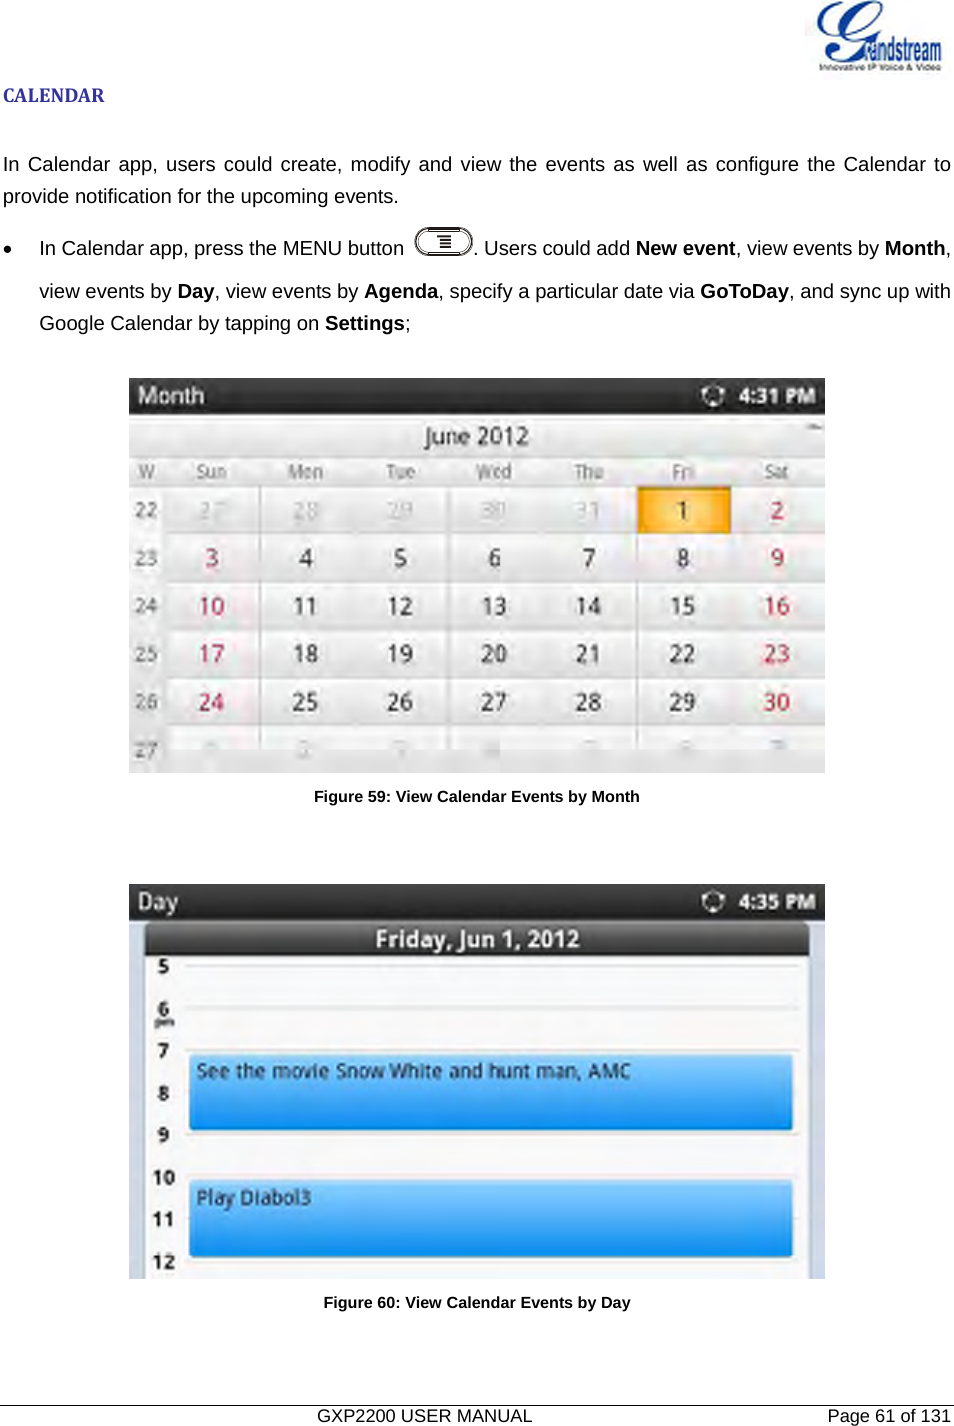   GXP2200 USER MANUAL       Page 61 of 131                                  CALENDARIn Calendar app, users could create, modify and view the events as well as configure the Calendar to provide notification for the upcoming events. •  In Calendar app, press the MENU button  . Users could add New event, view events by Month, view events by Day, view events by Agenda, specify a particular date via GoToDay, and sync up with Google Calendar by tapping on Settings;   Figure 59: View Calendar Events by Month    Figure 60: View Calendar Events by Day   